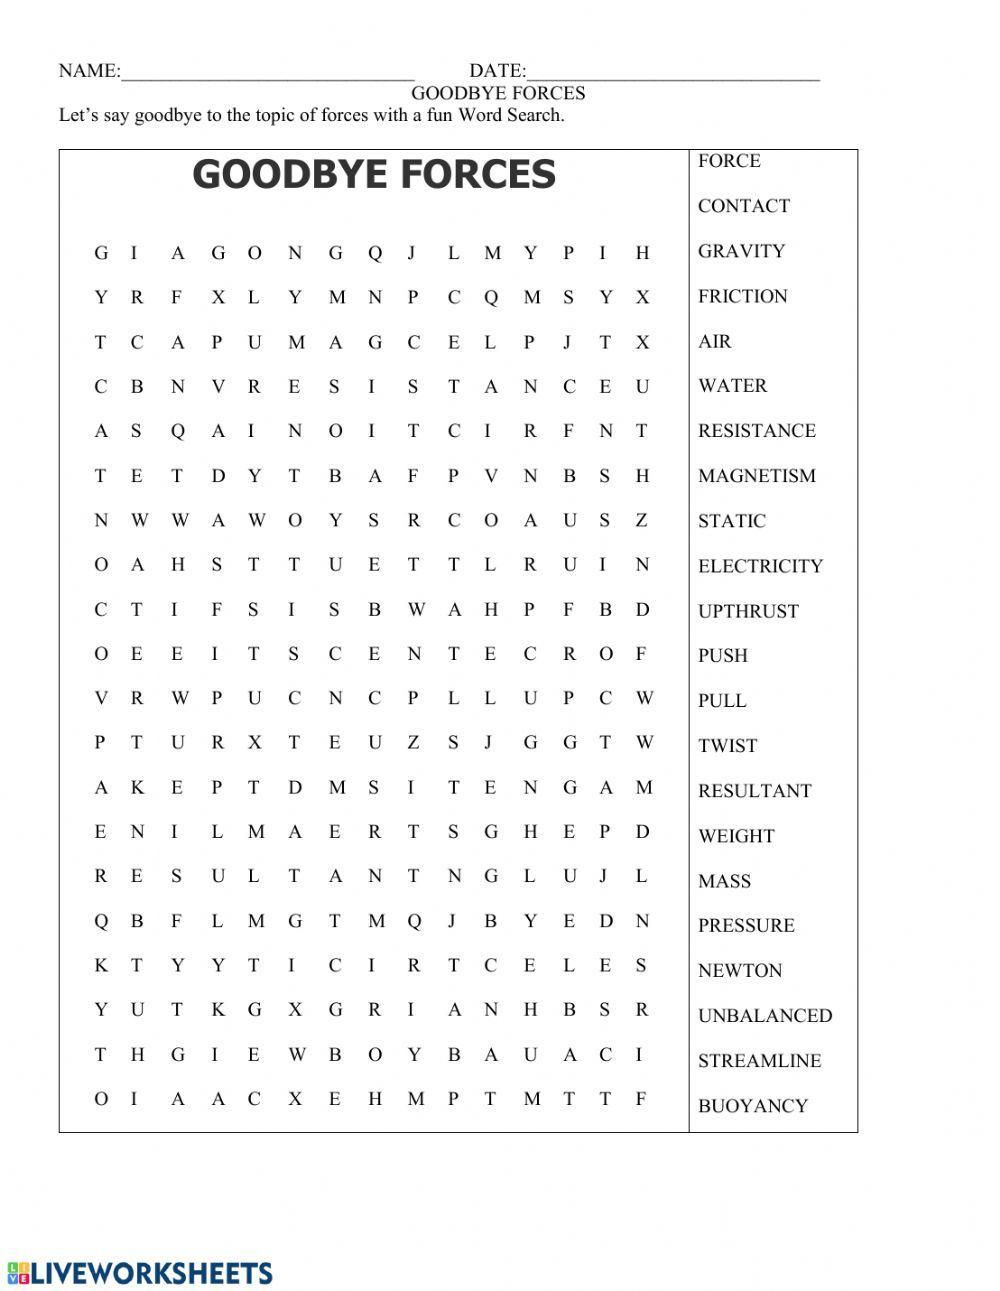 Goodby Forces